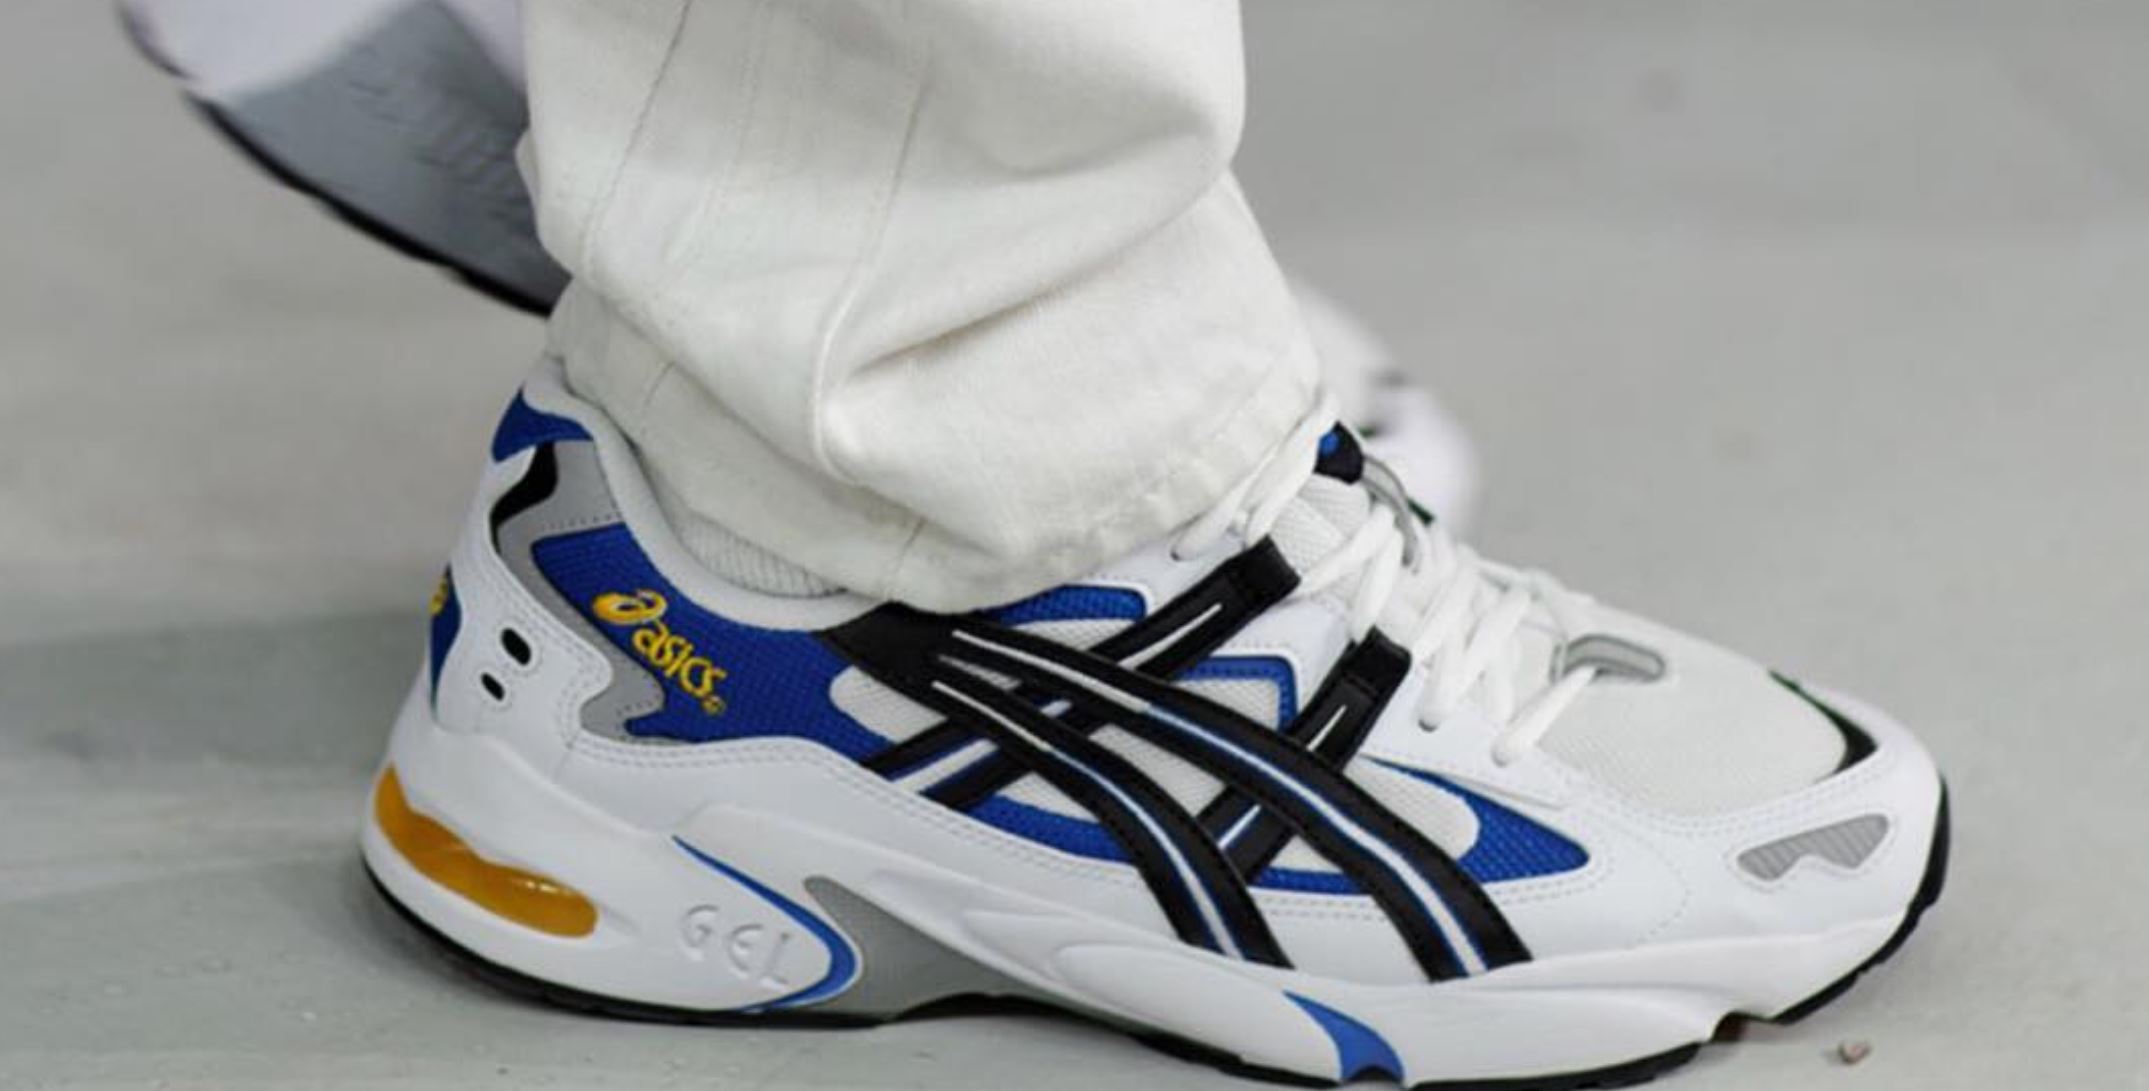 An Asics Gel Kayano 5 Retro Was Spotted 